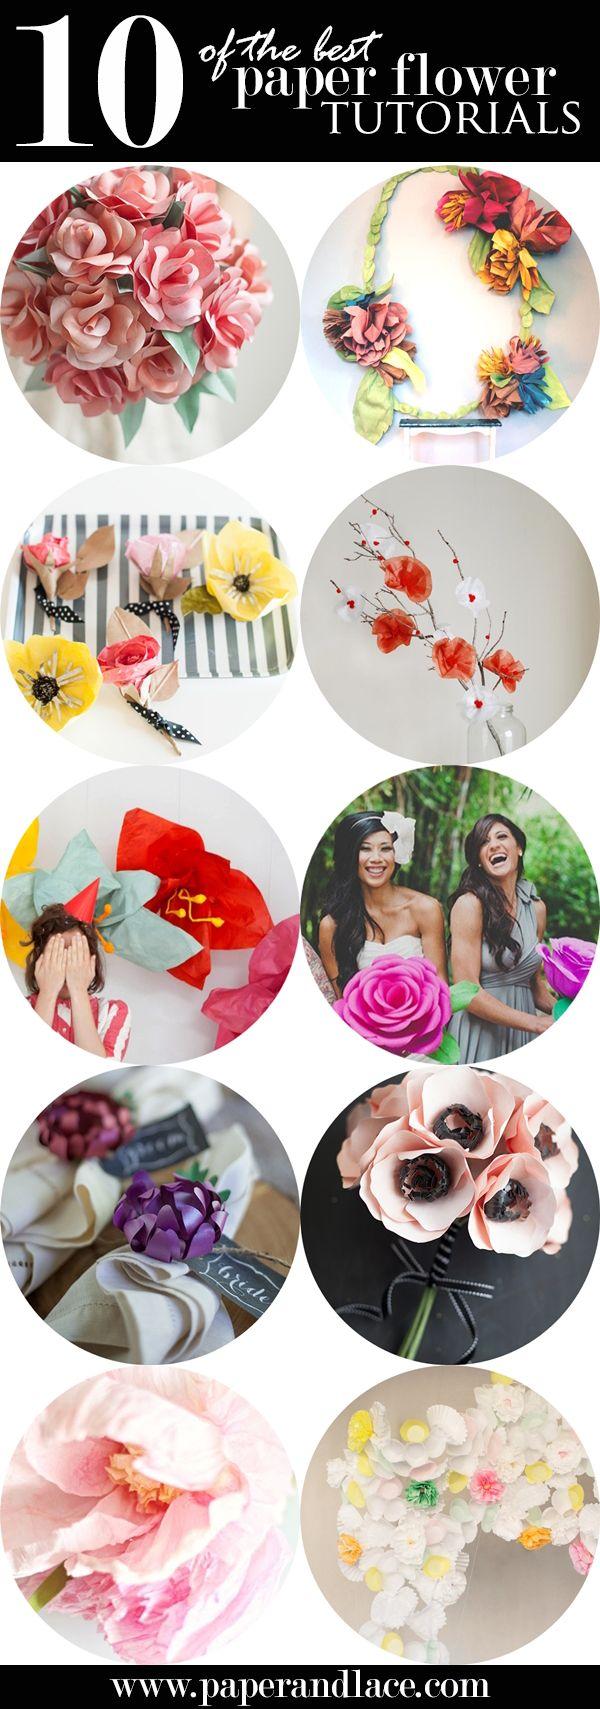 Wedding - 10 Of The BEST Paper Flower Tutorials. Which One Would You Make